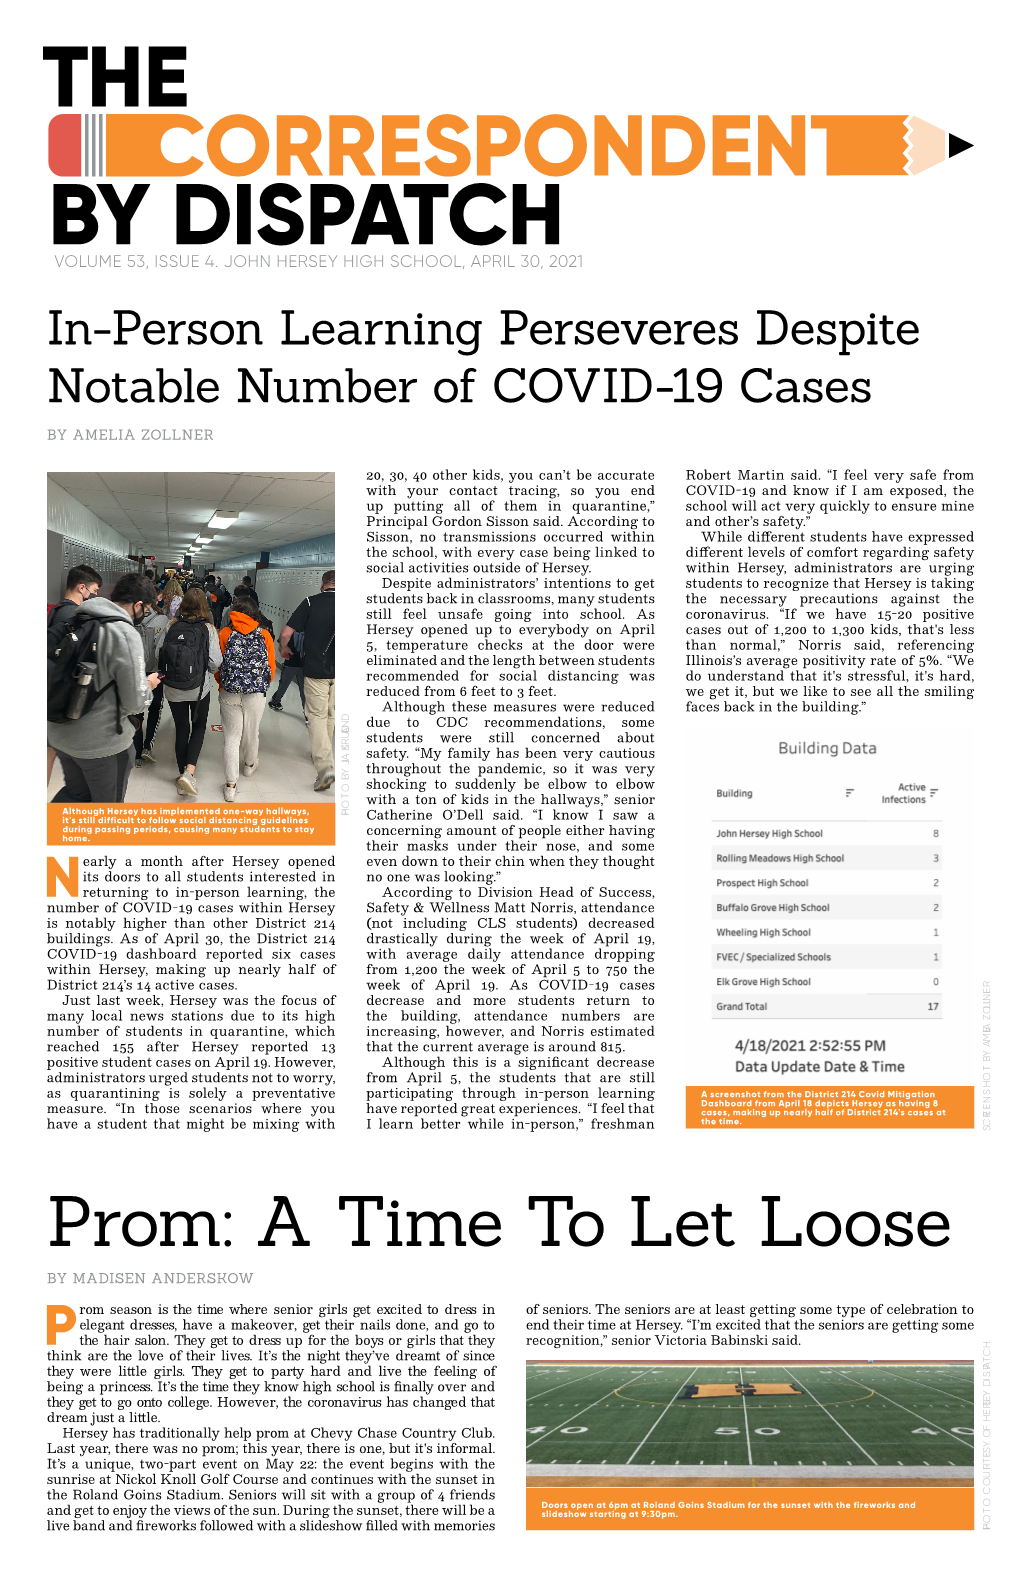 Prom: a Time to Let Loose by MADISEN ANDERSKOW